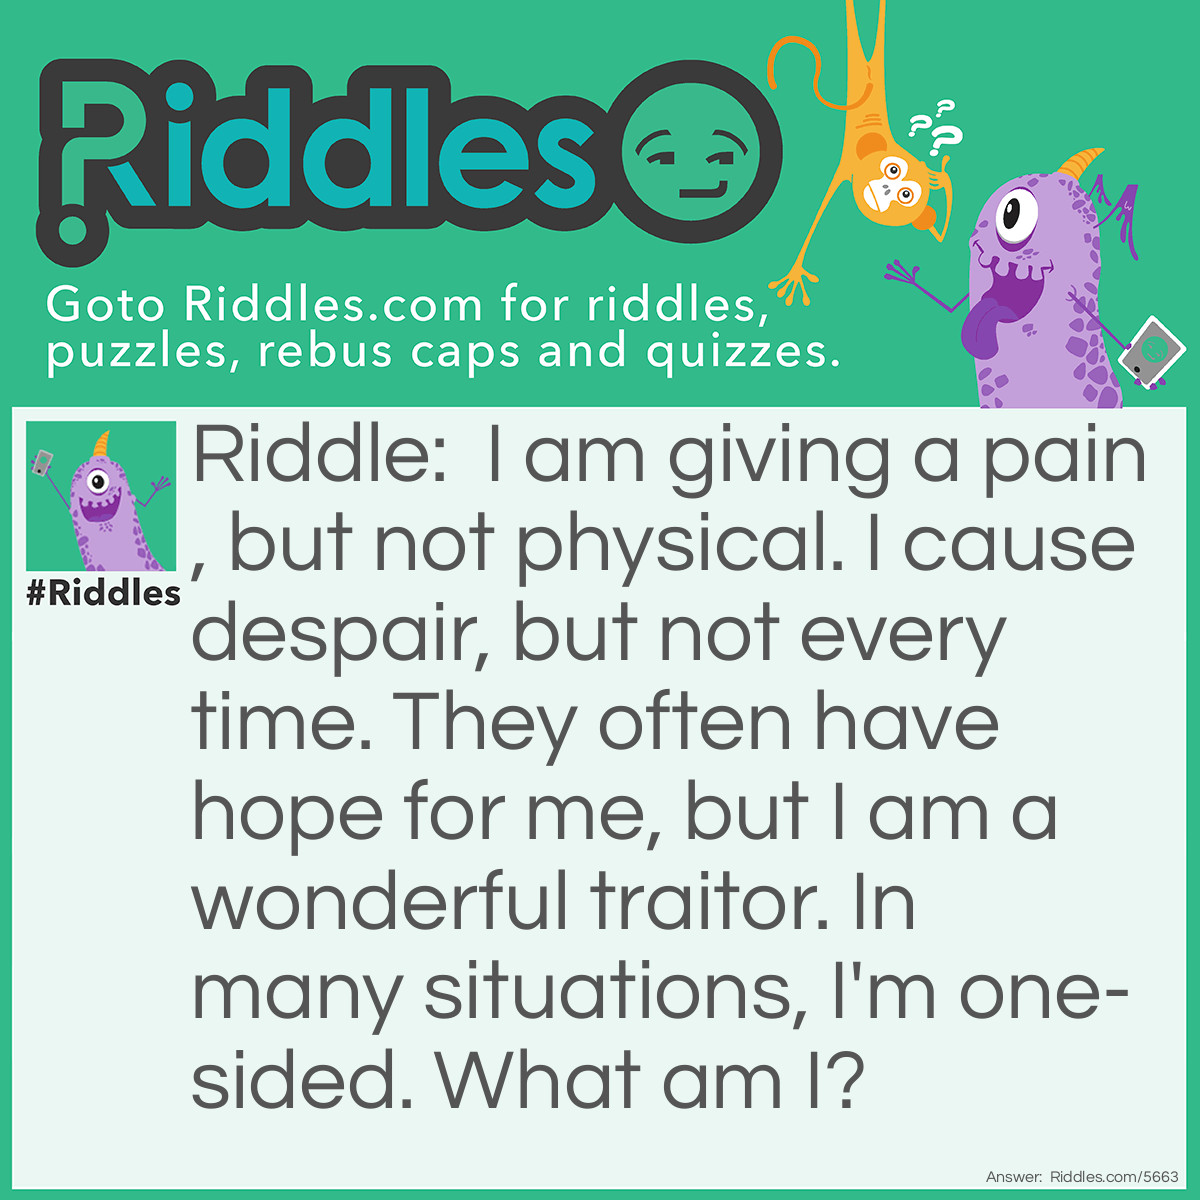 Riddle: I am giving a pain, but not physical. I cause despair, but not every time. They often have hope for me, but I am a wonderful traitor. In many situations, I'm one-sided. What am I? Answer: Love.